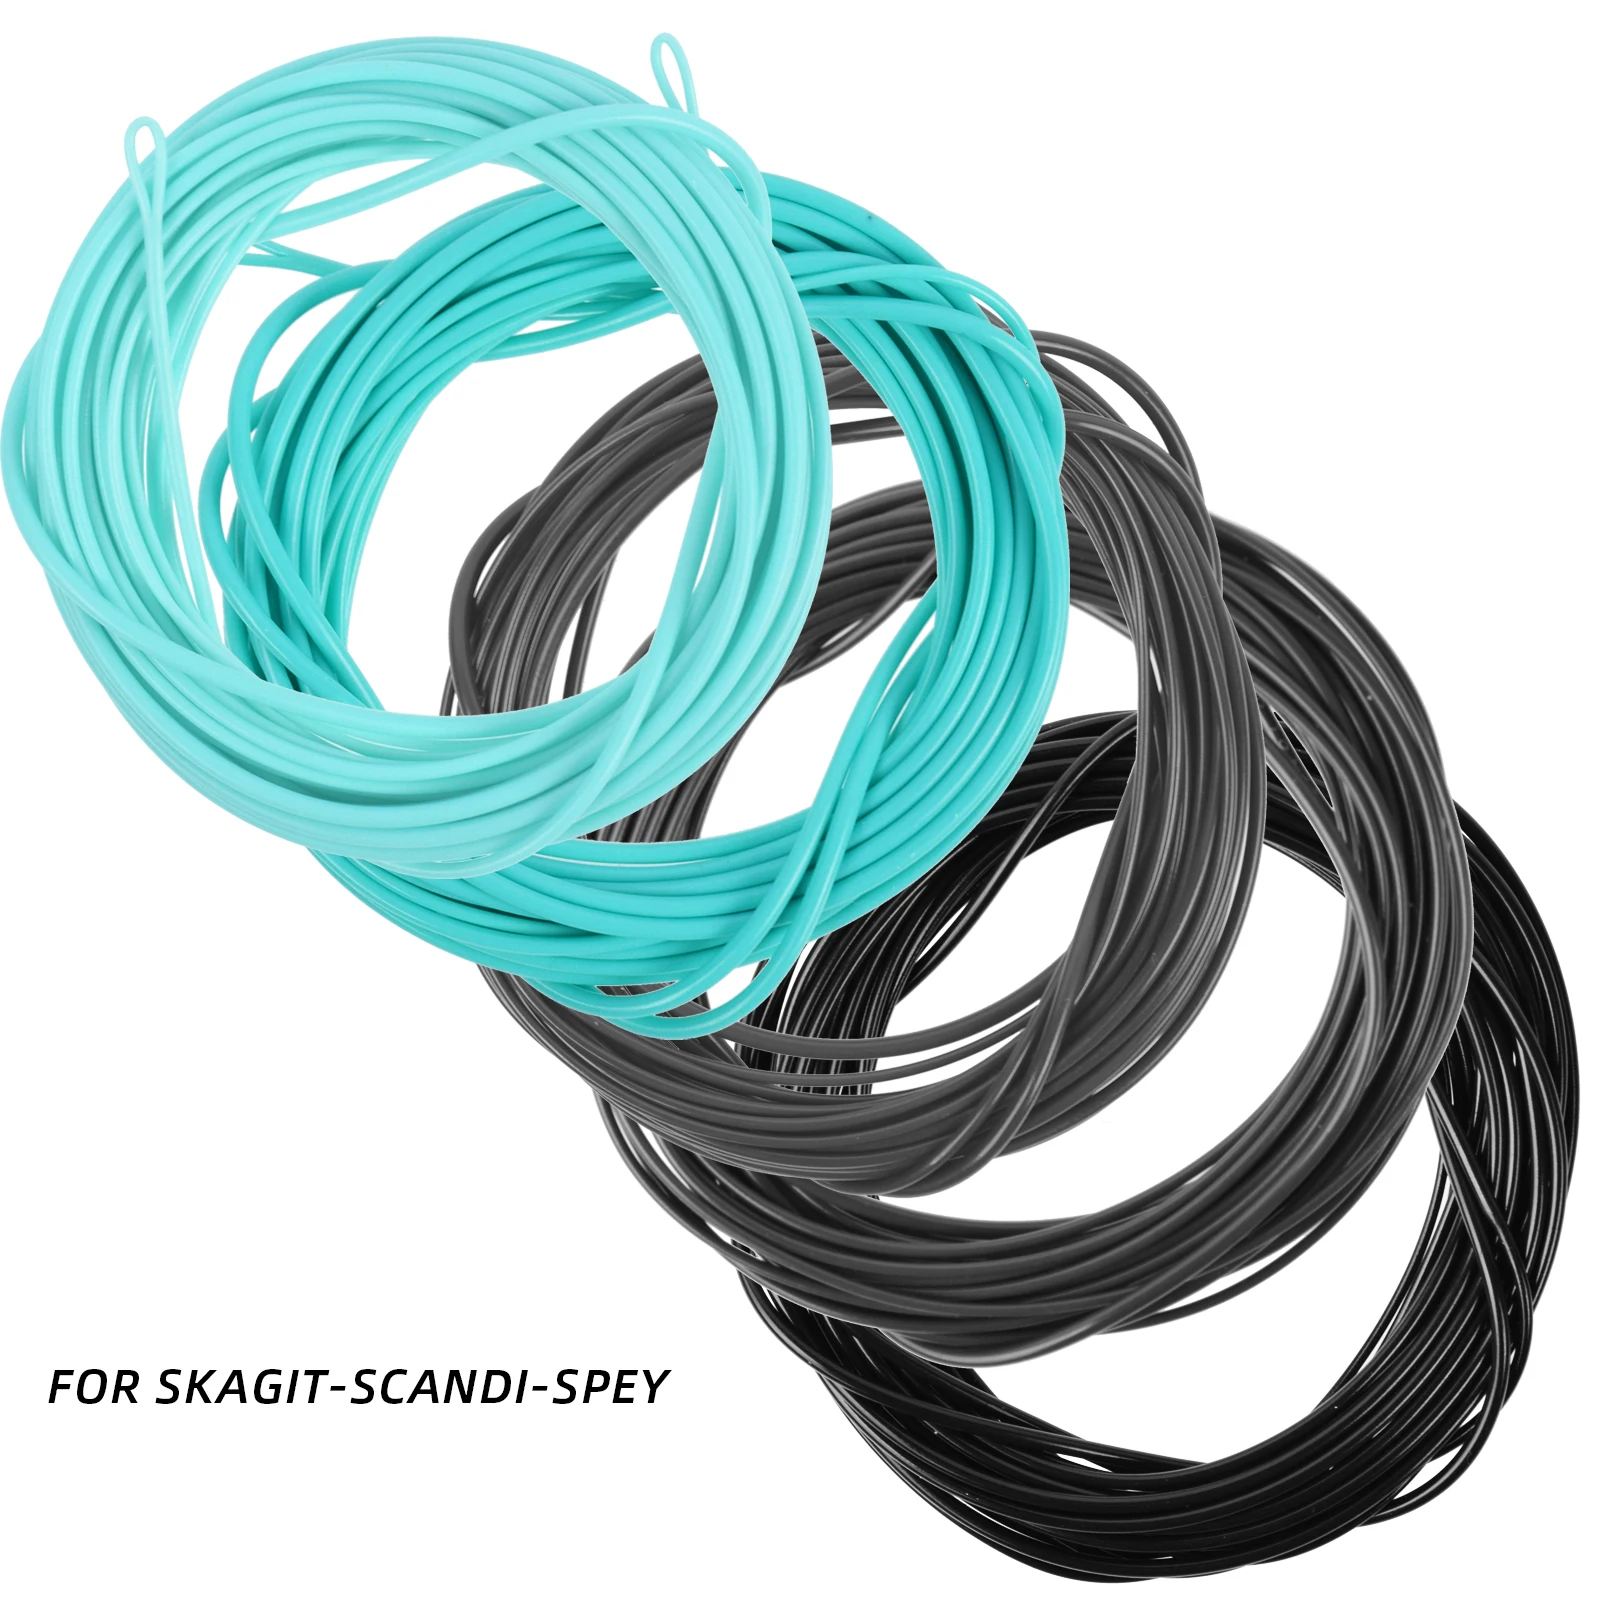 SF Skagit Tips Scandi with 2 Welded Loops Fly Fishing Spey Line Multi-Color  for Salmon Steelhead